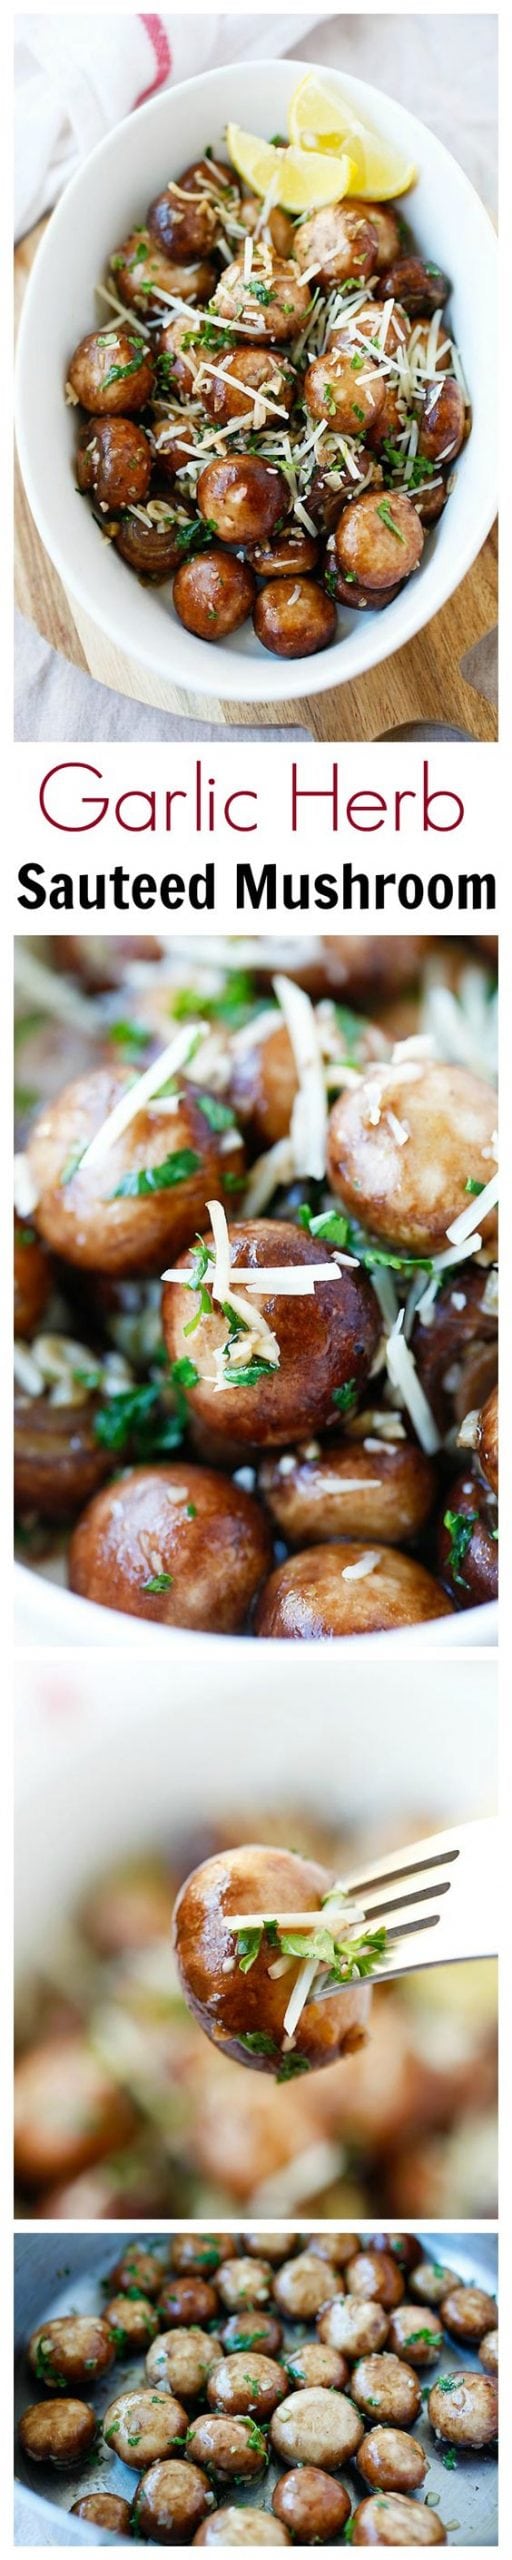 These garlic herb sauteed mushrooms are the best you will ever taste! The recipe is easy, healthy and only take 10 minutes, from start to finish. | rasamalaysia.com